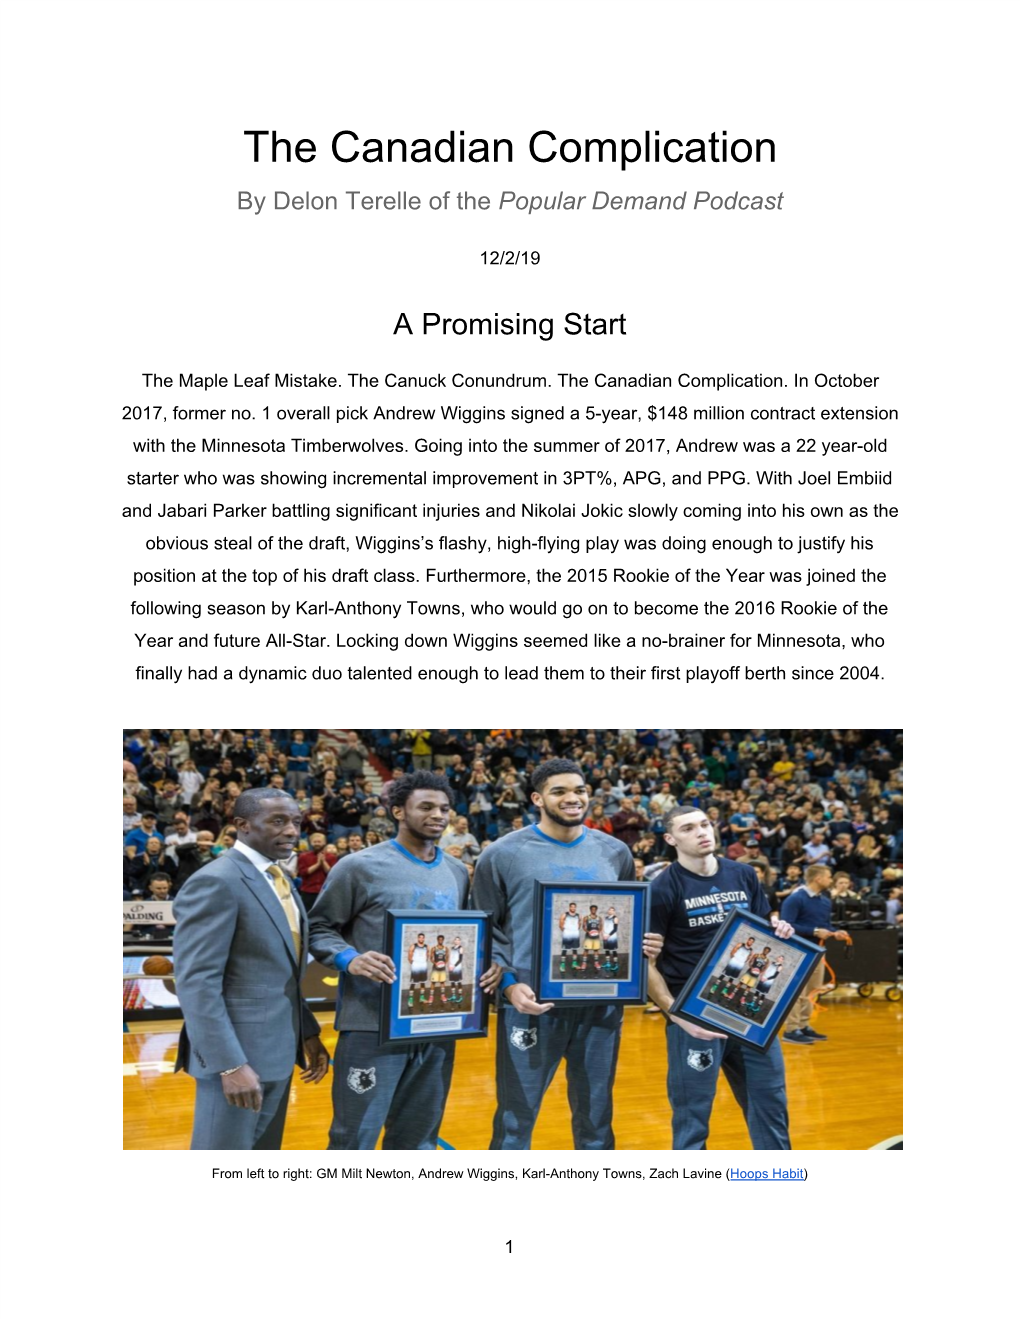 The Canadian Complication by Delon Terelle of the Popular Demand Podcast ​